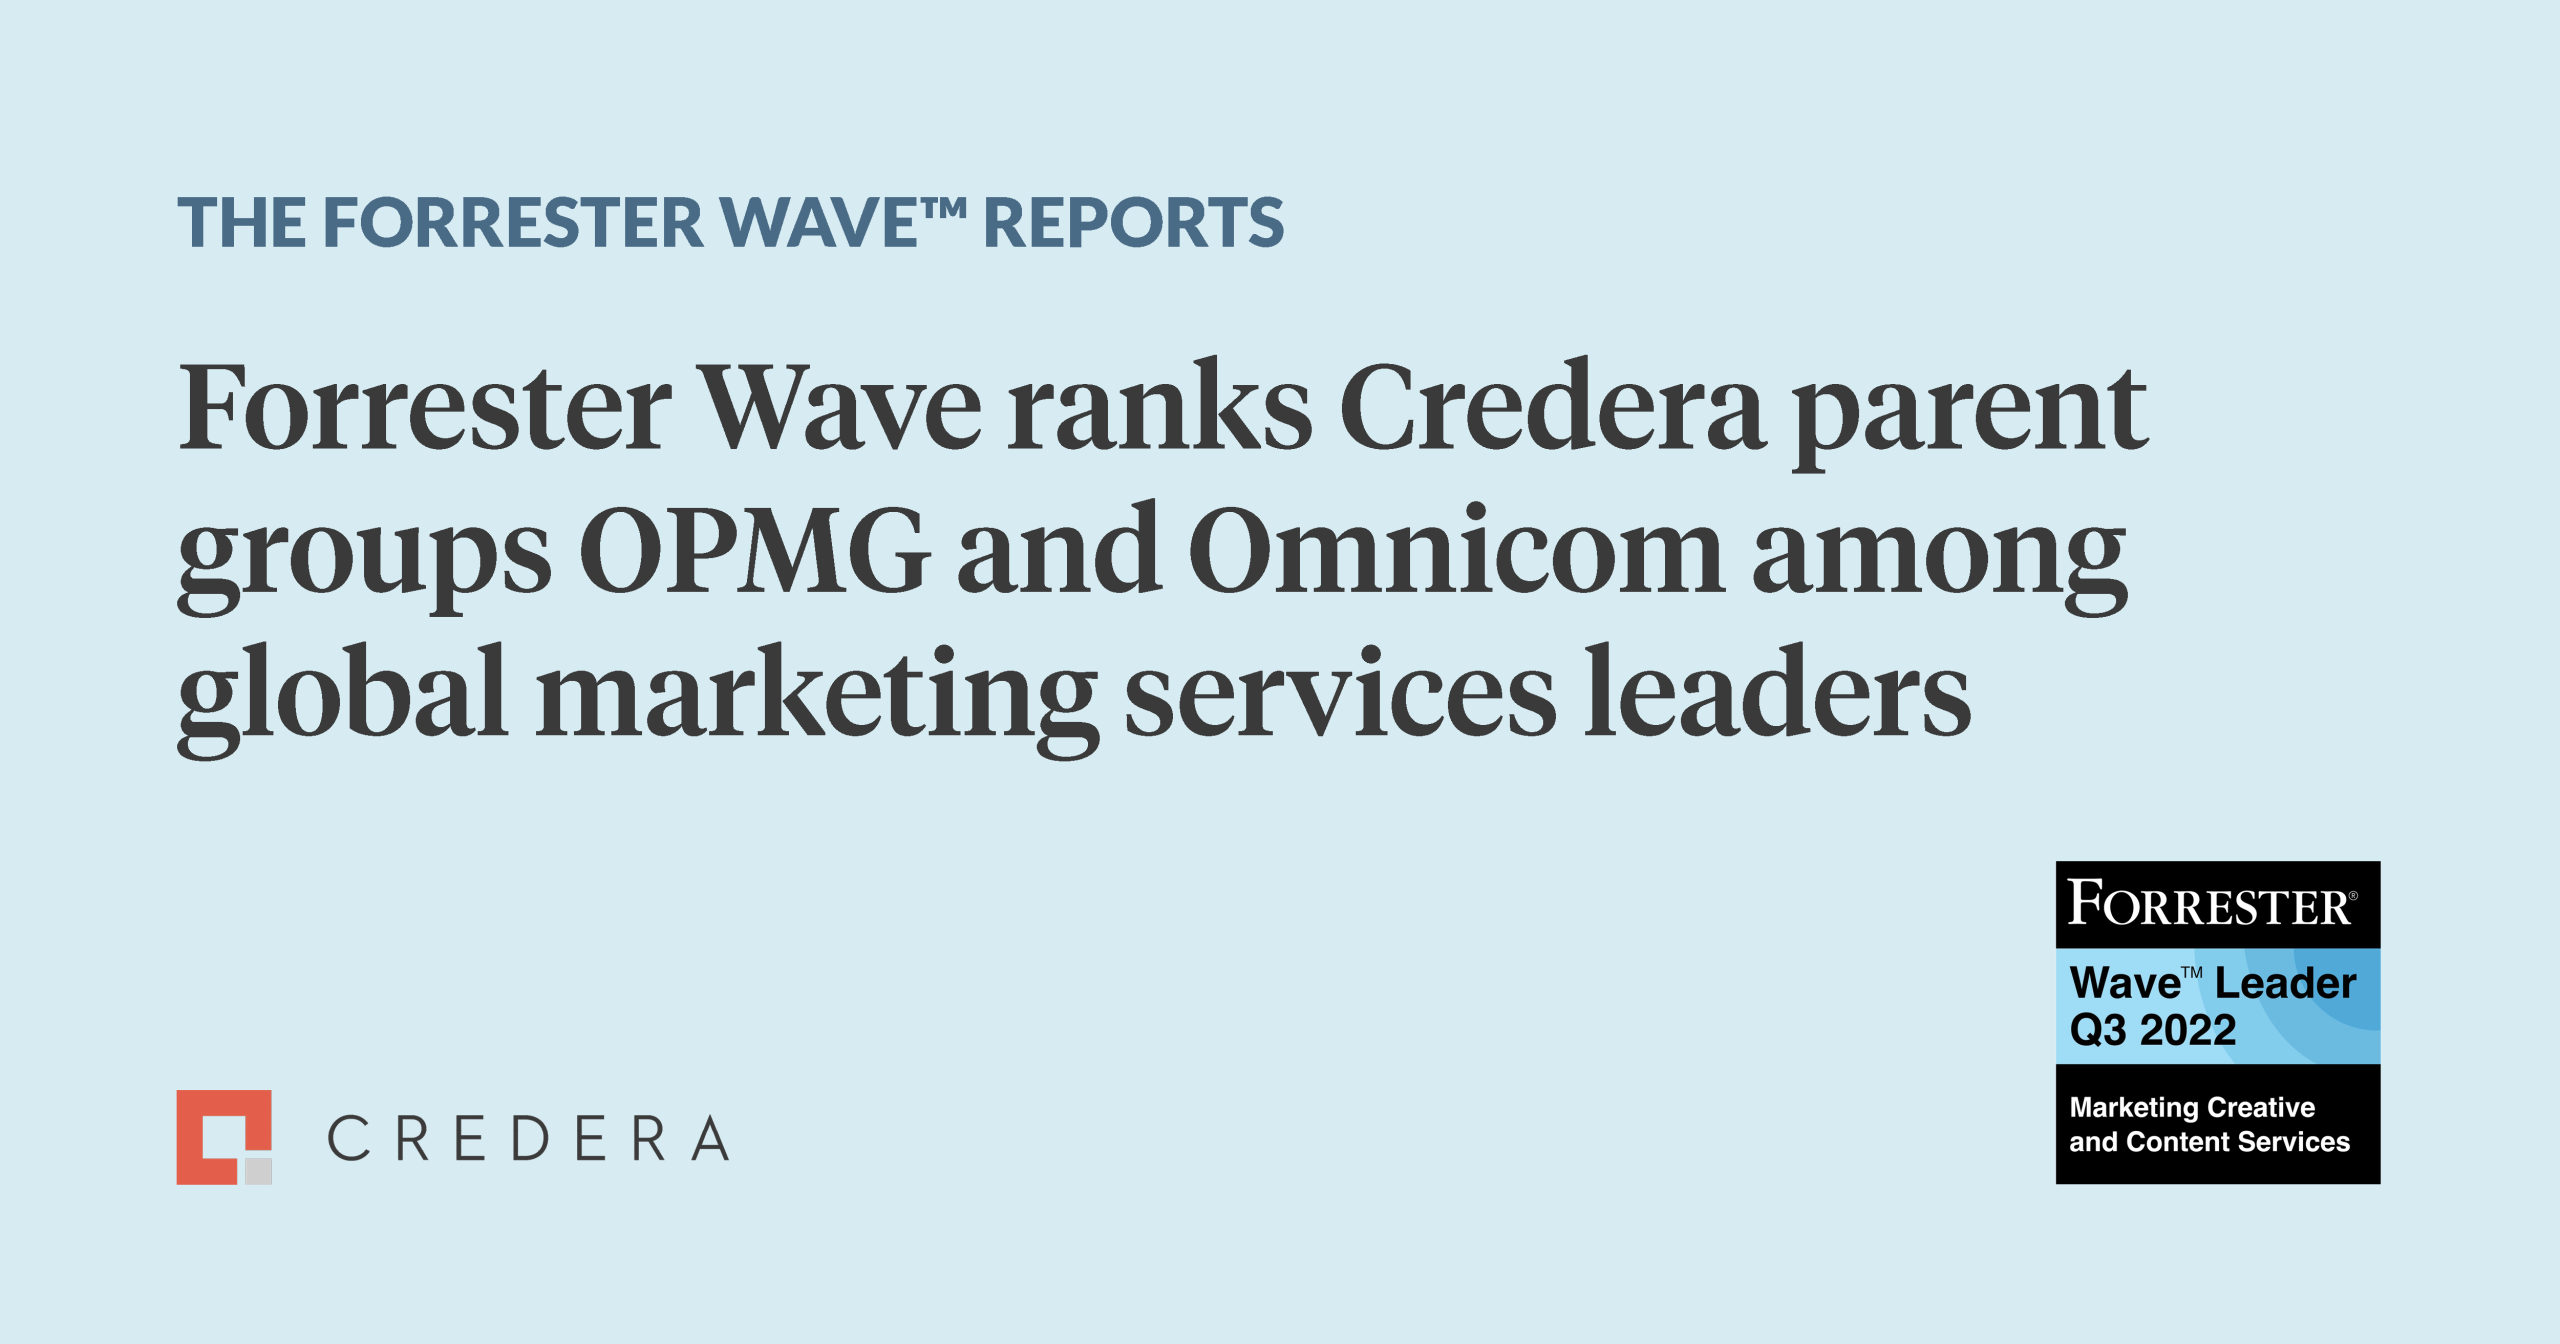 The Forrester Wave ranks Credera parent groups OPMG and Omnicom among the 